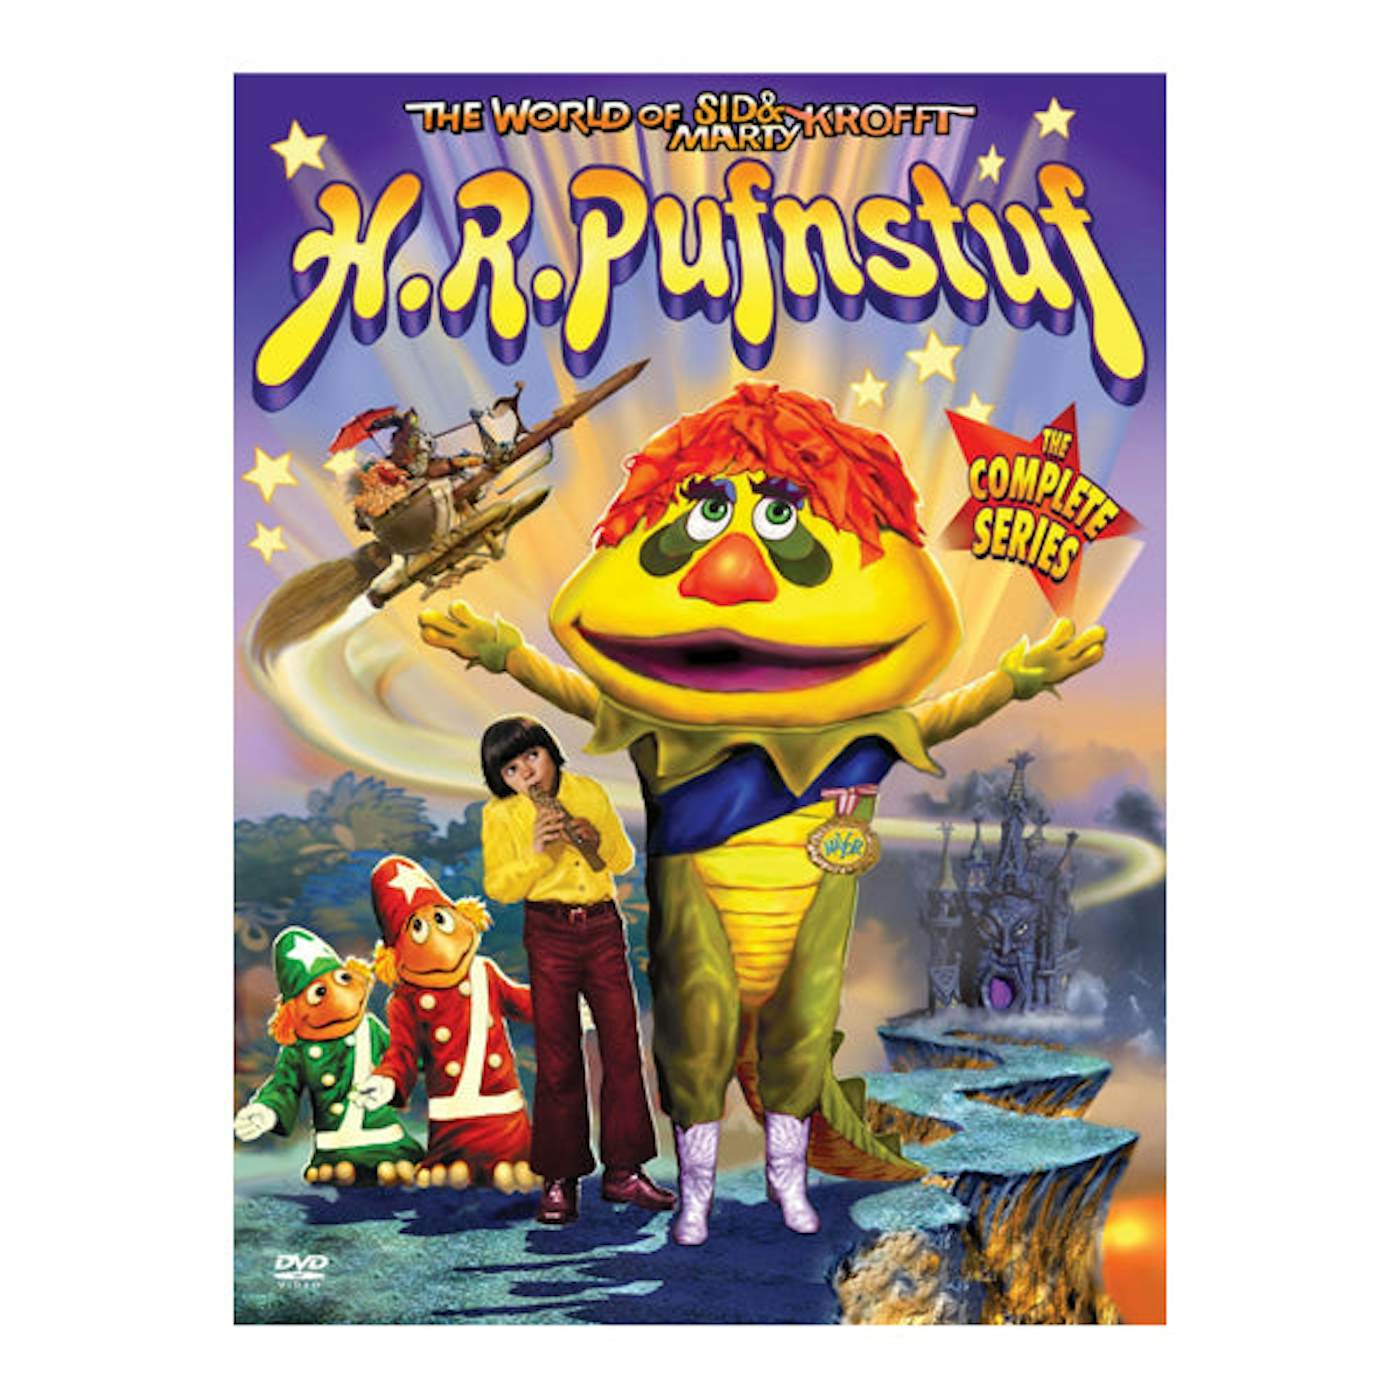 Sid & Marty Krofft Sid and Marty Archives - H.R. Pufnstuf - The Complete Series DVD